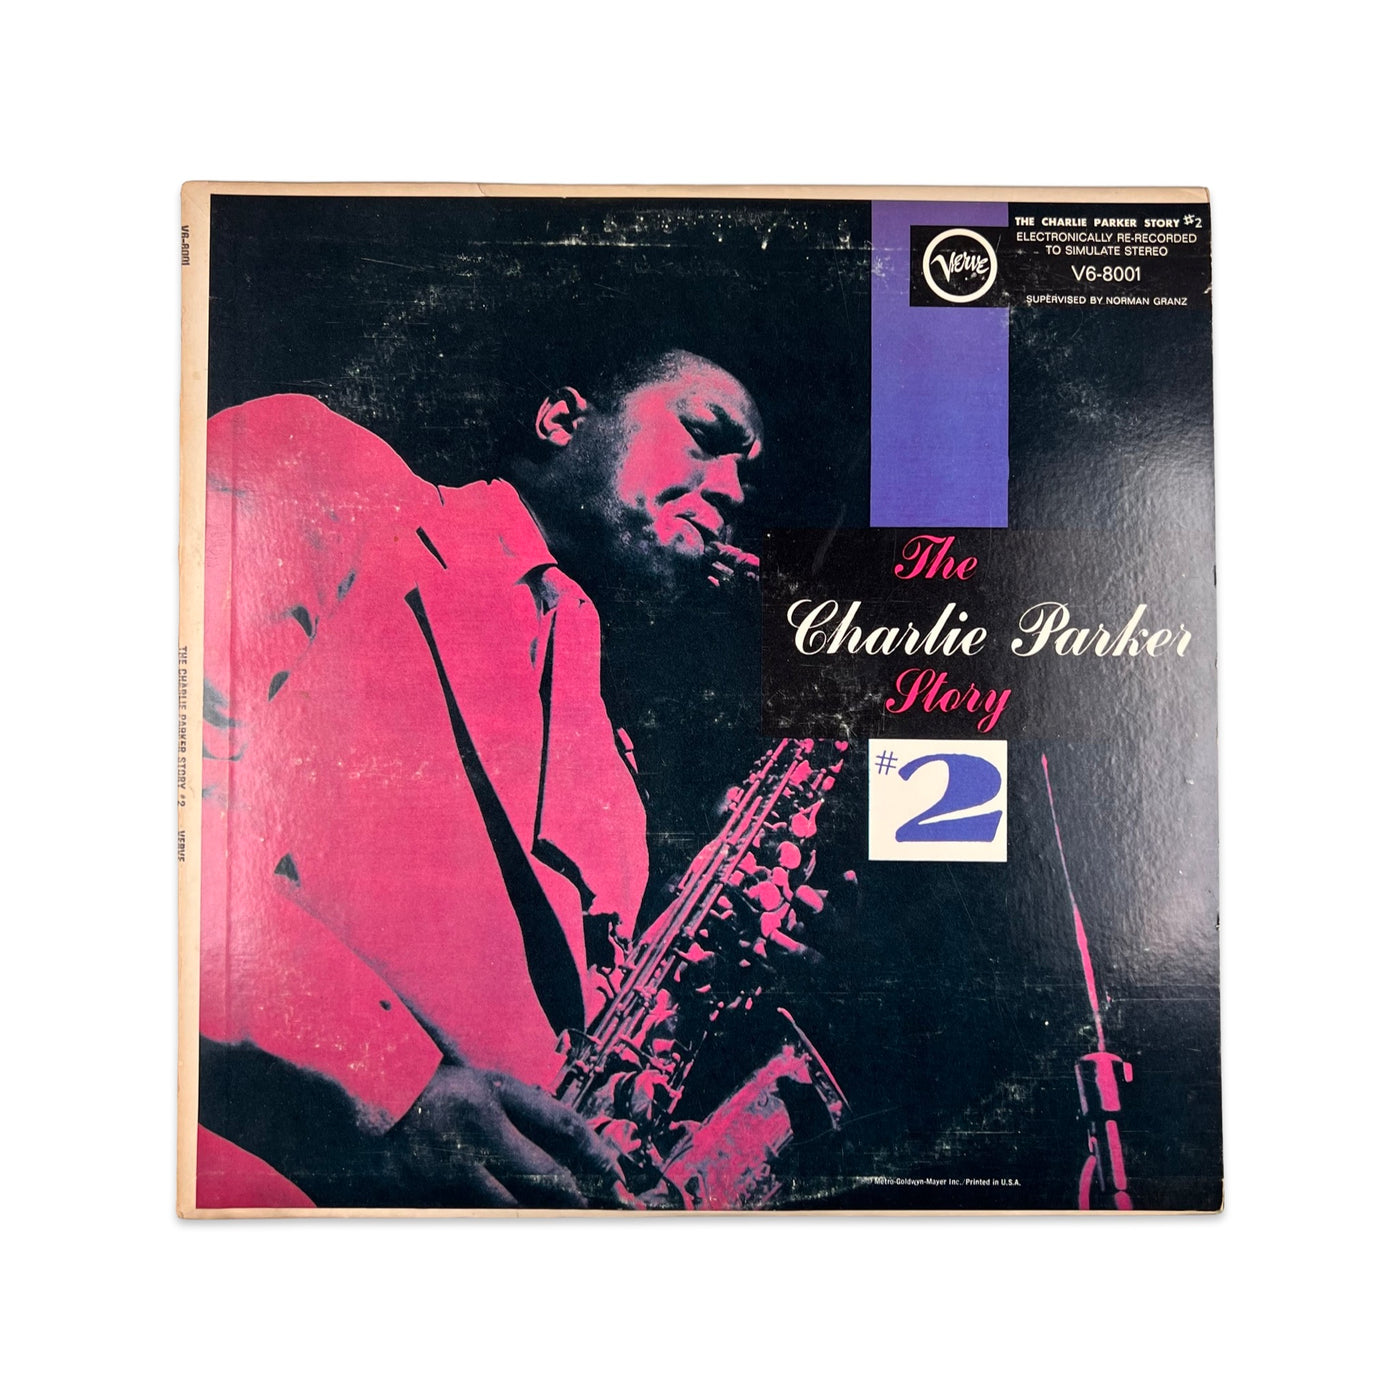 Charlie Parker – The Charlie Parker Story #2 - 1961 Stereo Reissue